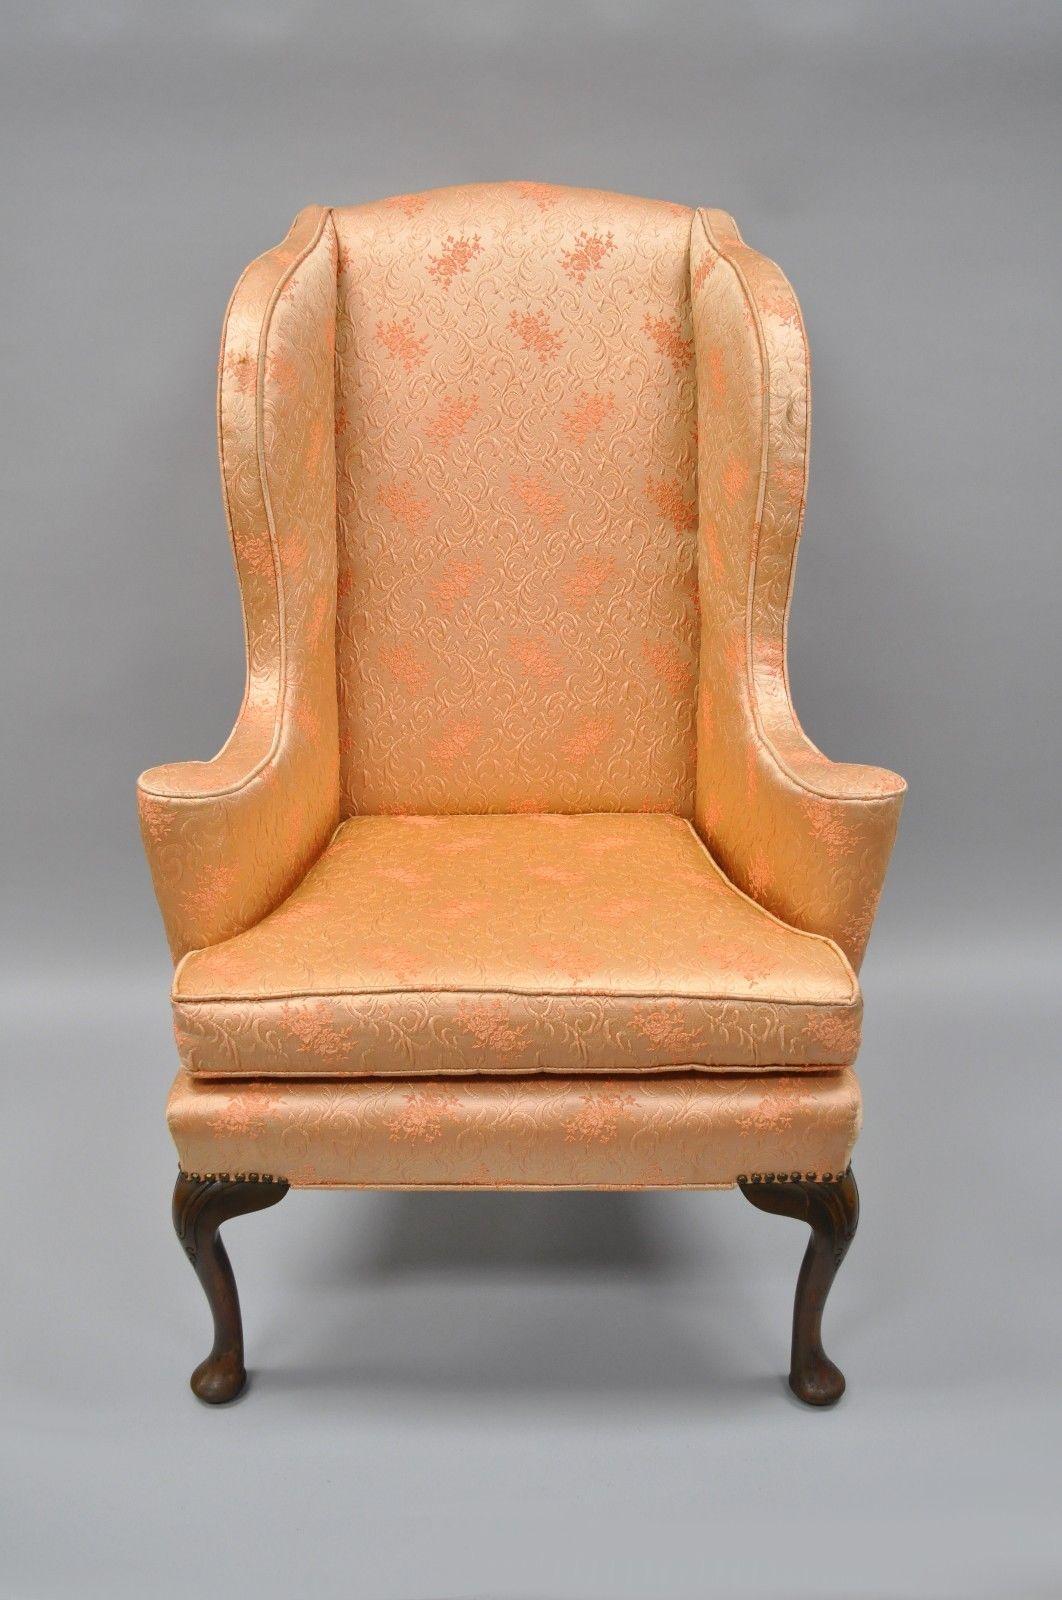 Antique Queen Anne wingback armchair with rolled arms. Item features dramatic Queen Anne legs, uniquely shaped wing-back, solid wood frame, upholstered seat, and quality American craftsmanship, circa early 1900s. Measurements: 49